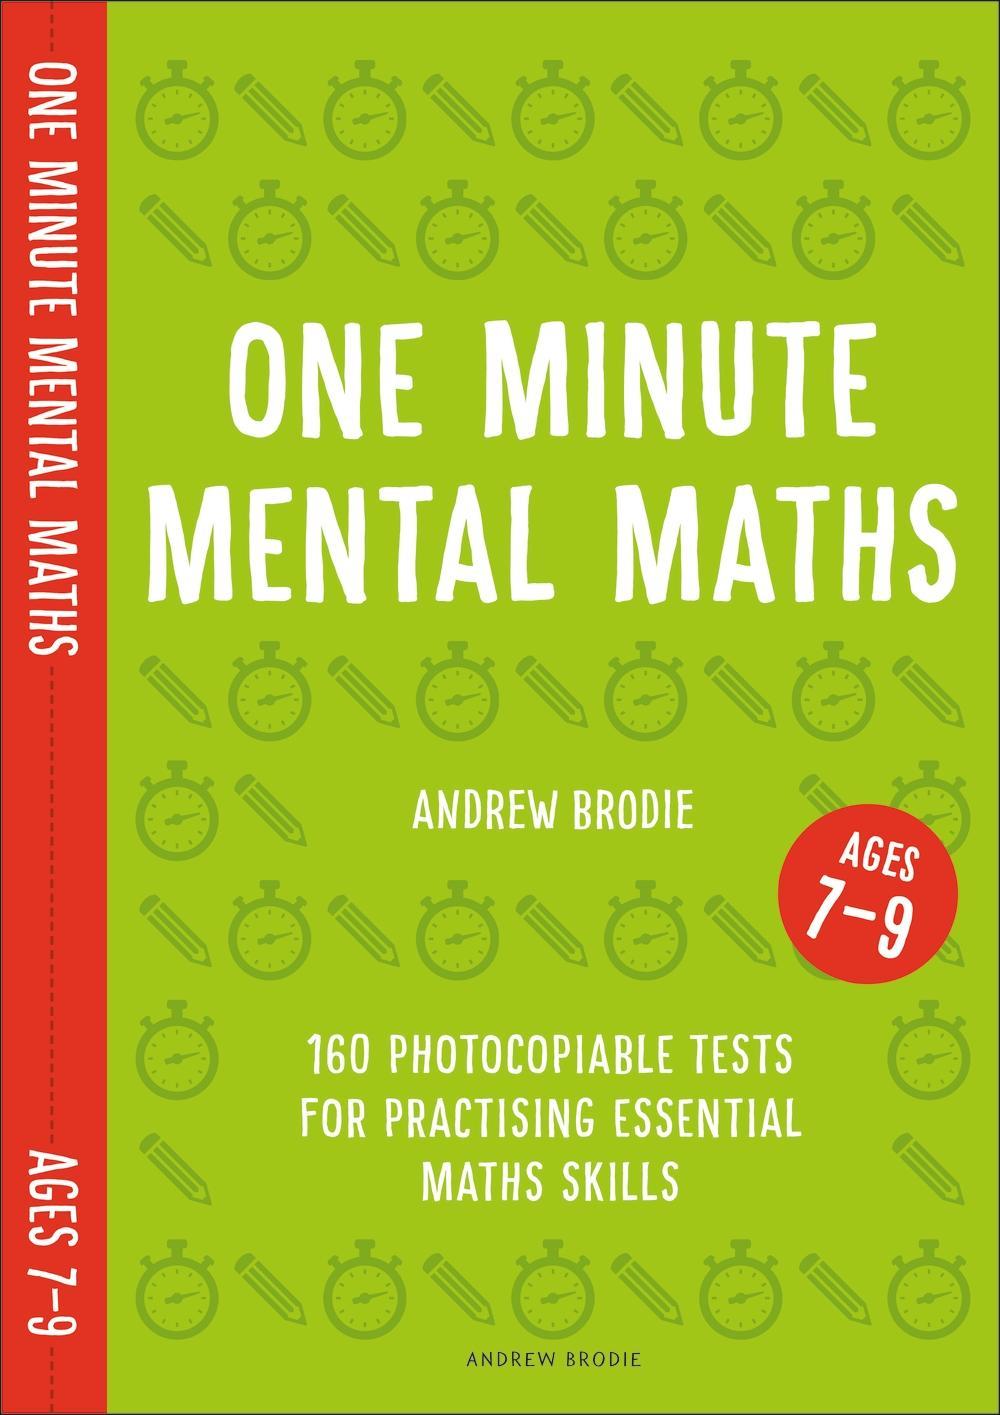 One Minute Mental Maths for Ages 7-9